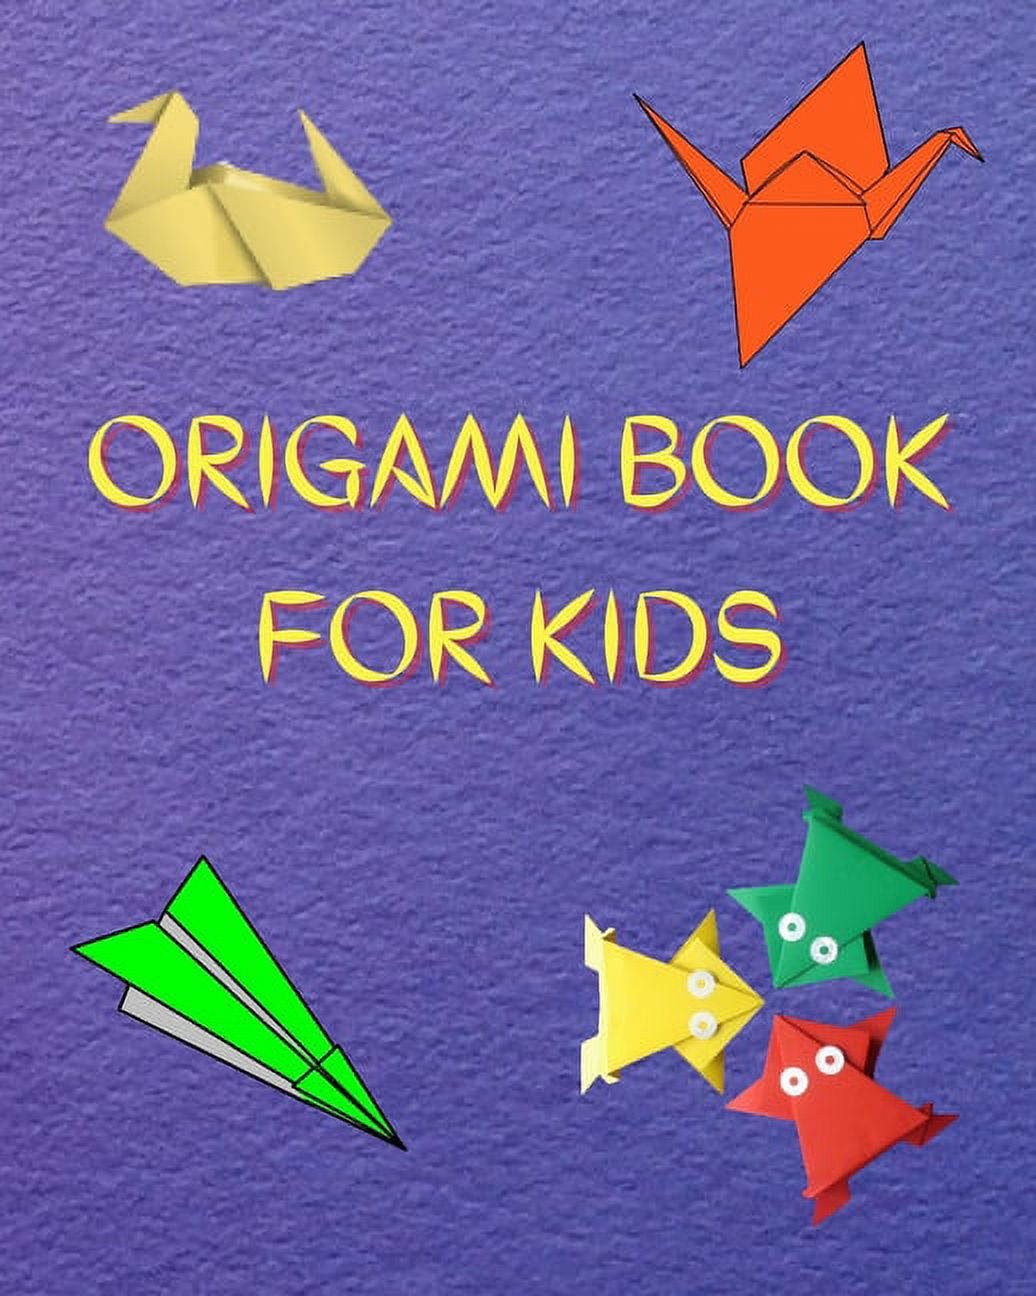 Origami Book for Kids : Big Origami Set Includes Origami Book and